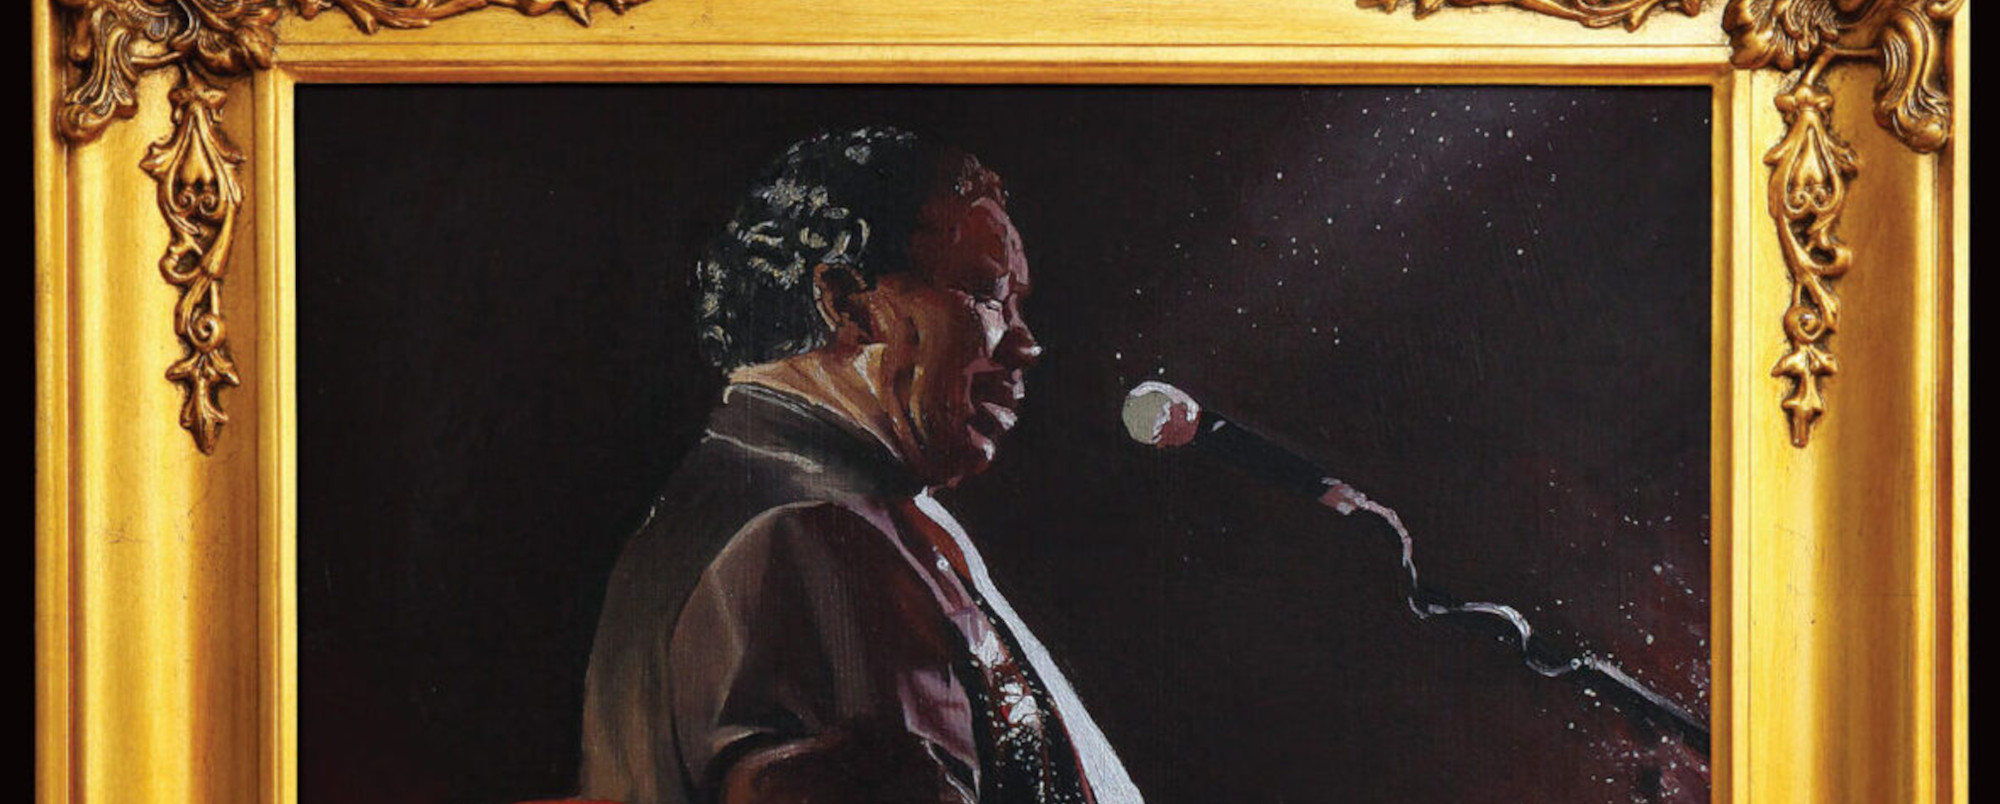 Muddy Waters’ Son, Mud Morganfield, to Release New Album ‘Portrait’